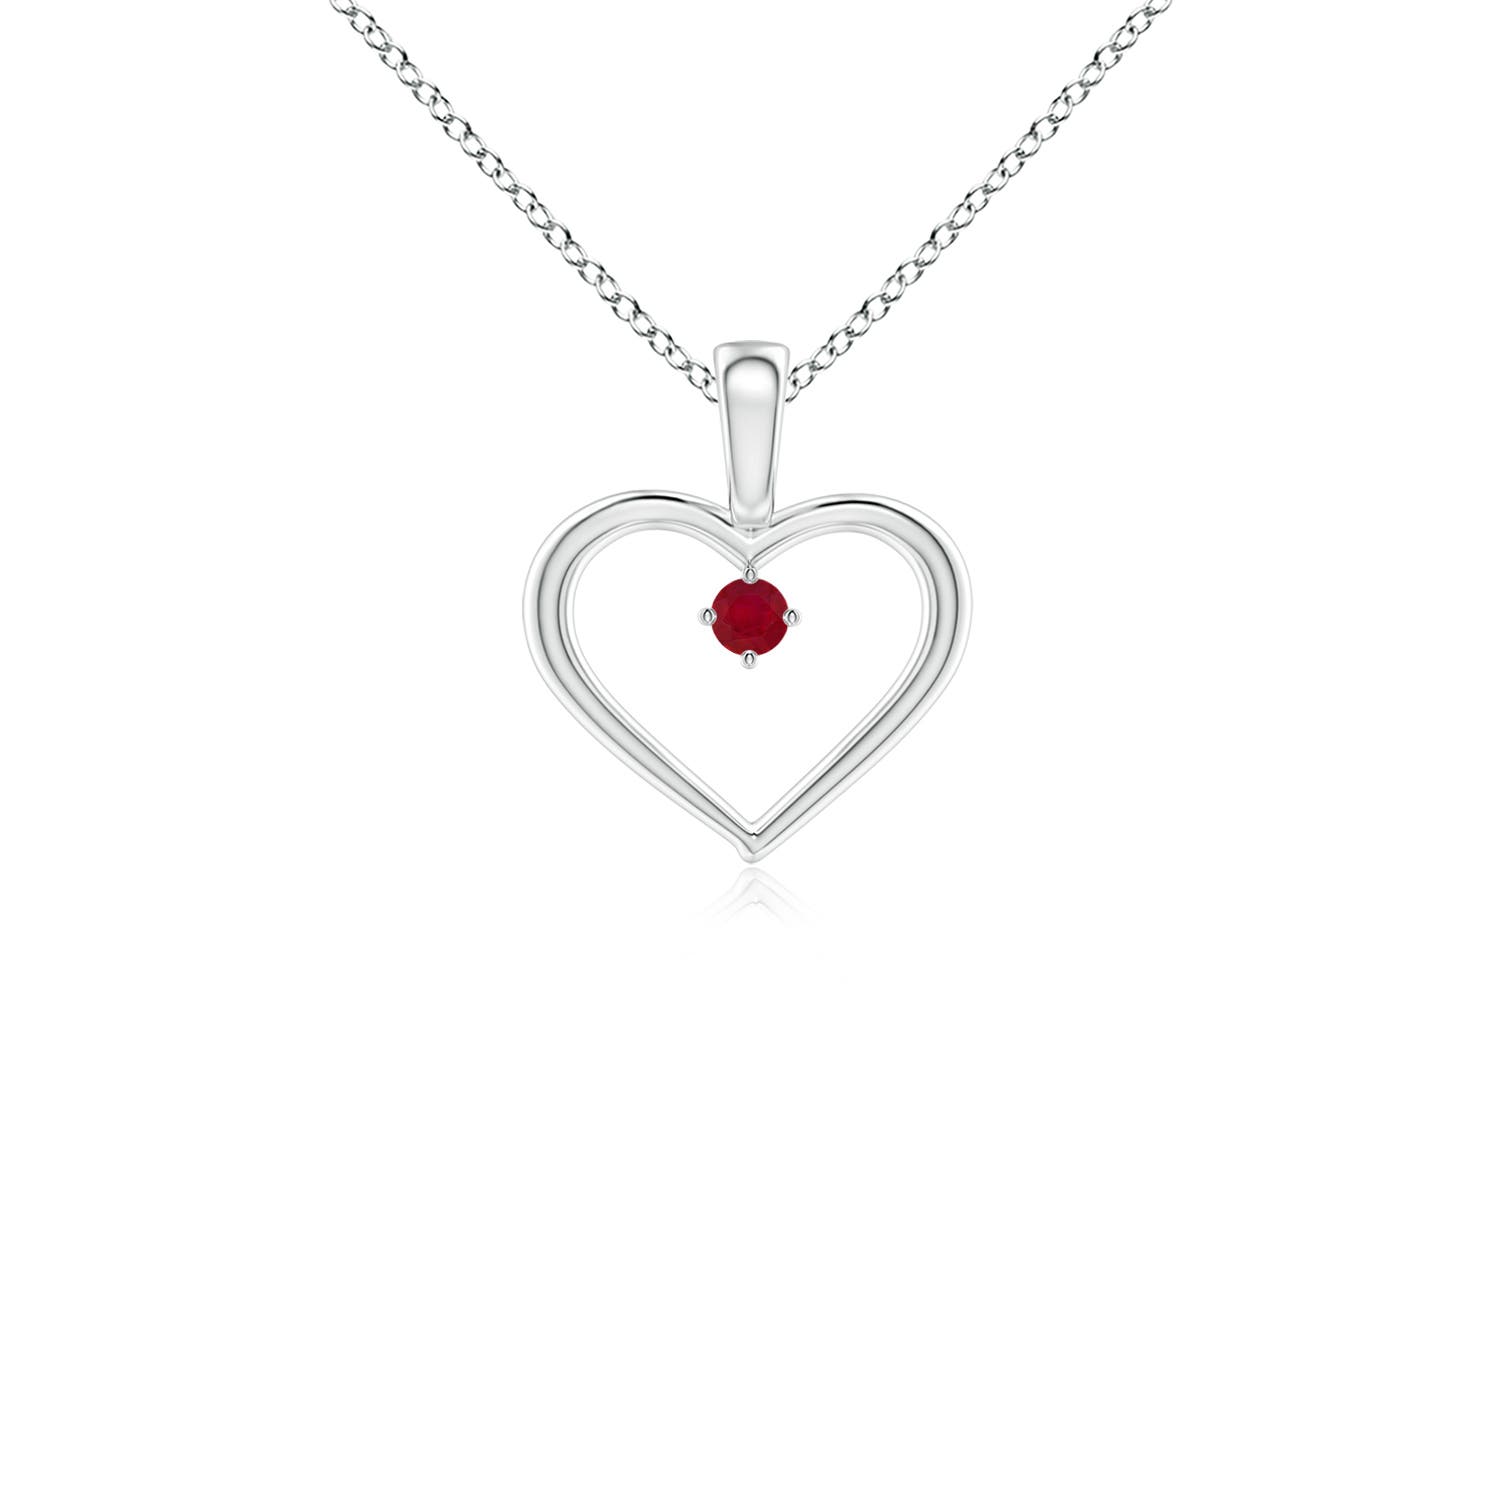 AA - Ruby / 0.09 CT / 14 KT White Gold